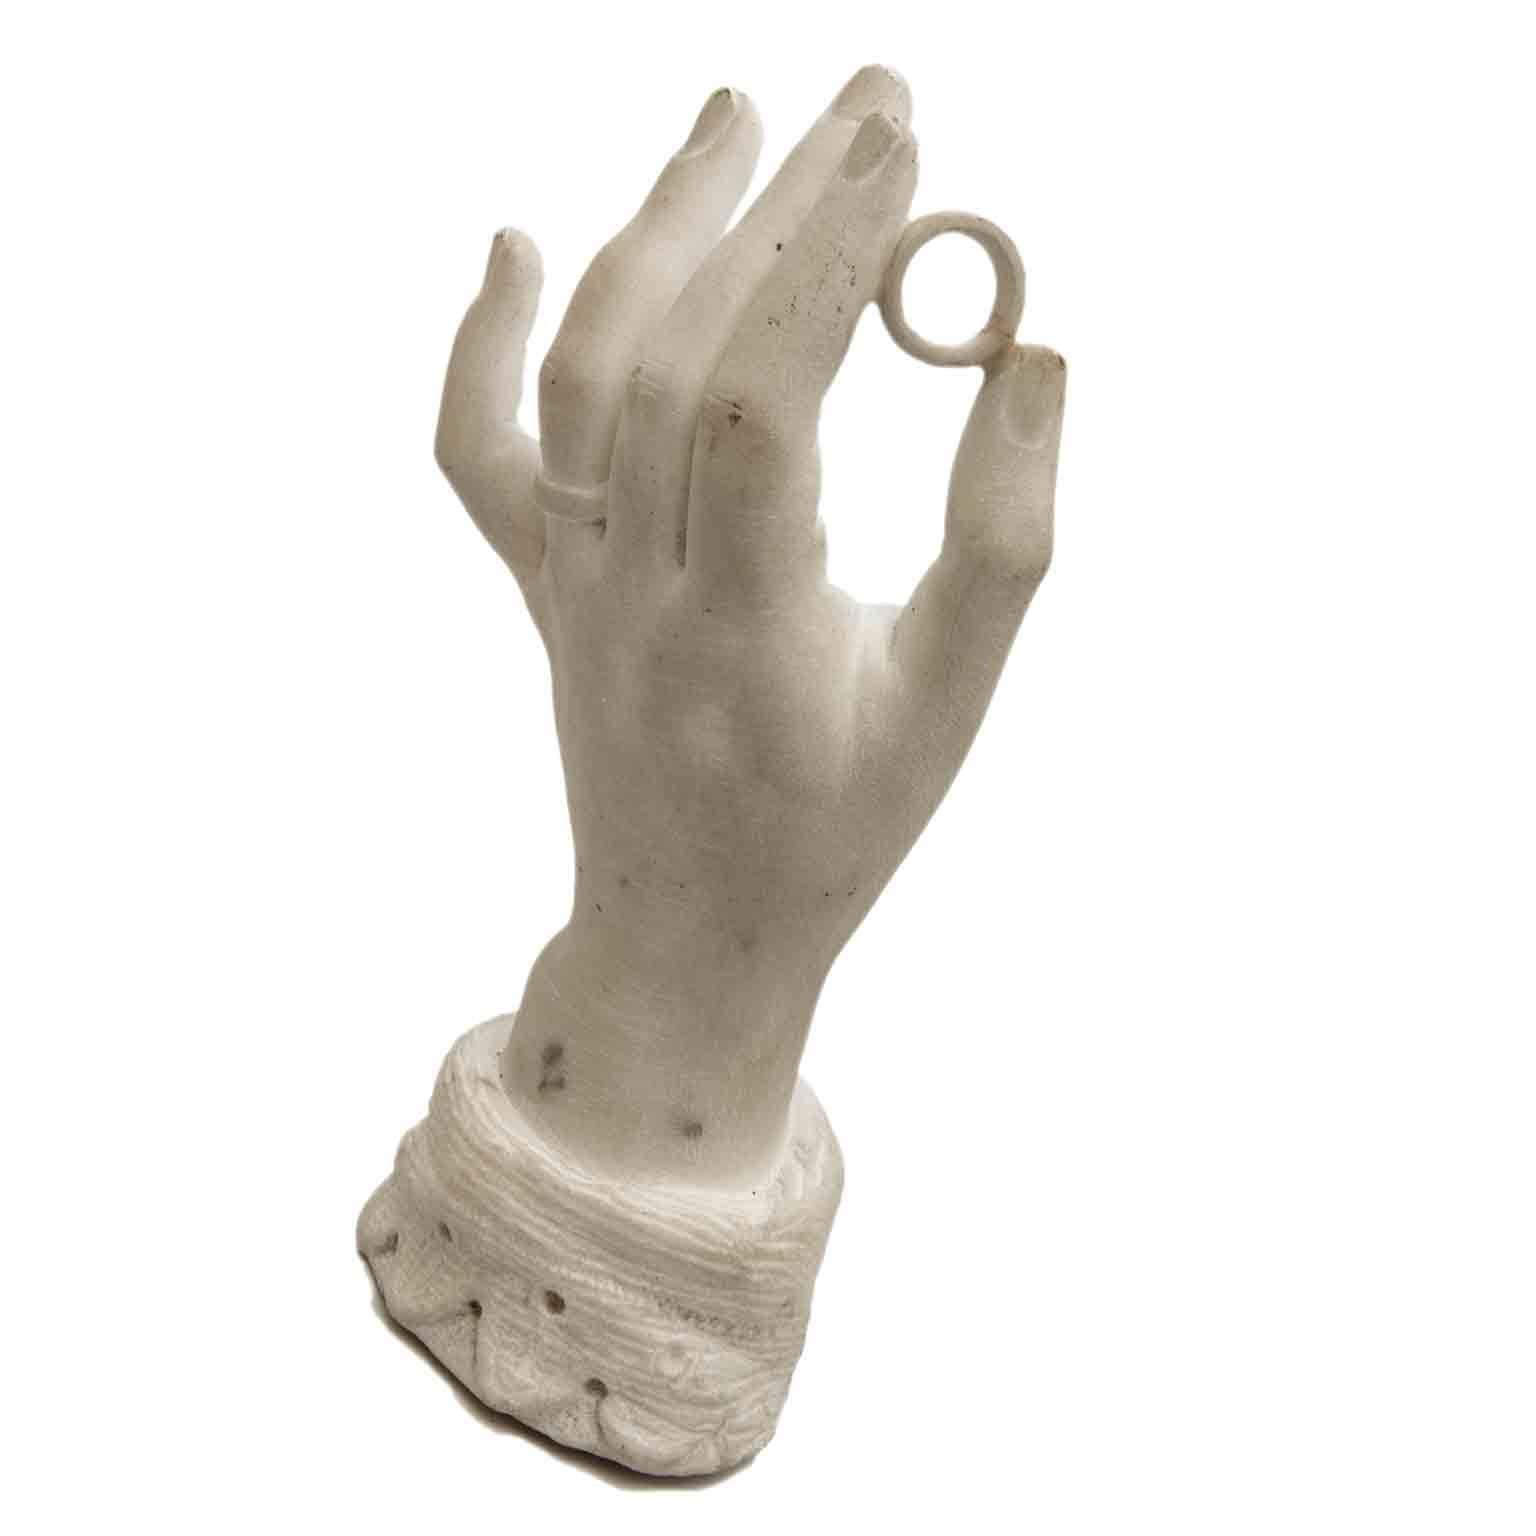 A 20th century Italian white marble sculpture of the left hand of a bride, a carved Carrara marble hand sculpture, realized as ring-holder or paperweight, since the carving of the cuff sleeve is missing in the lower part, at the bottom. 

A unique